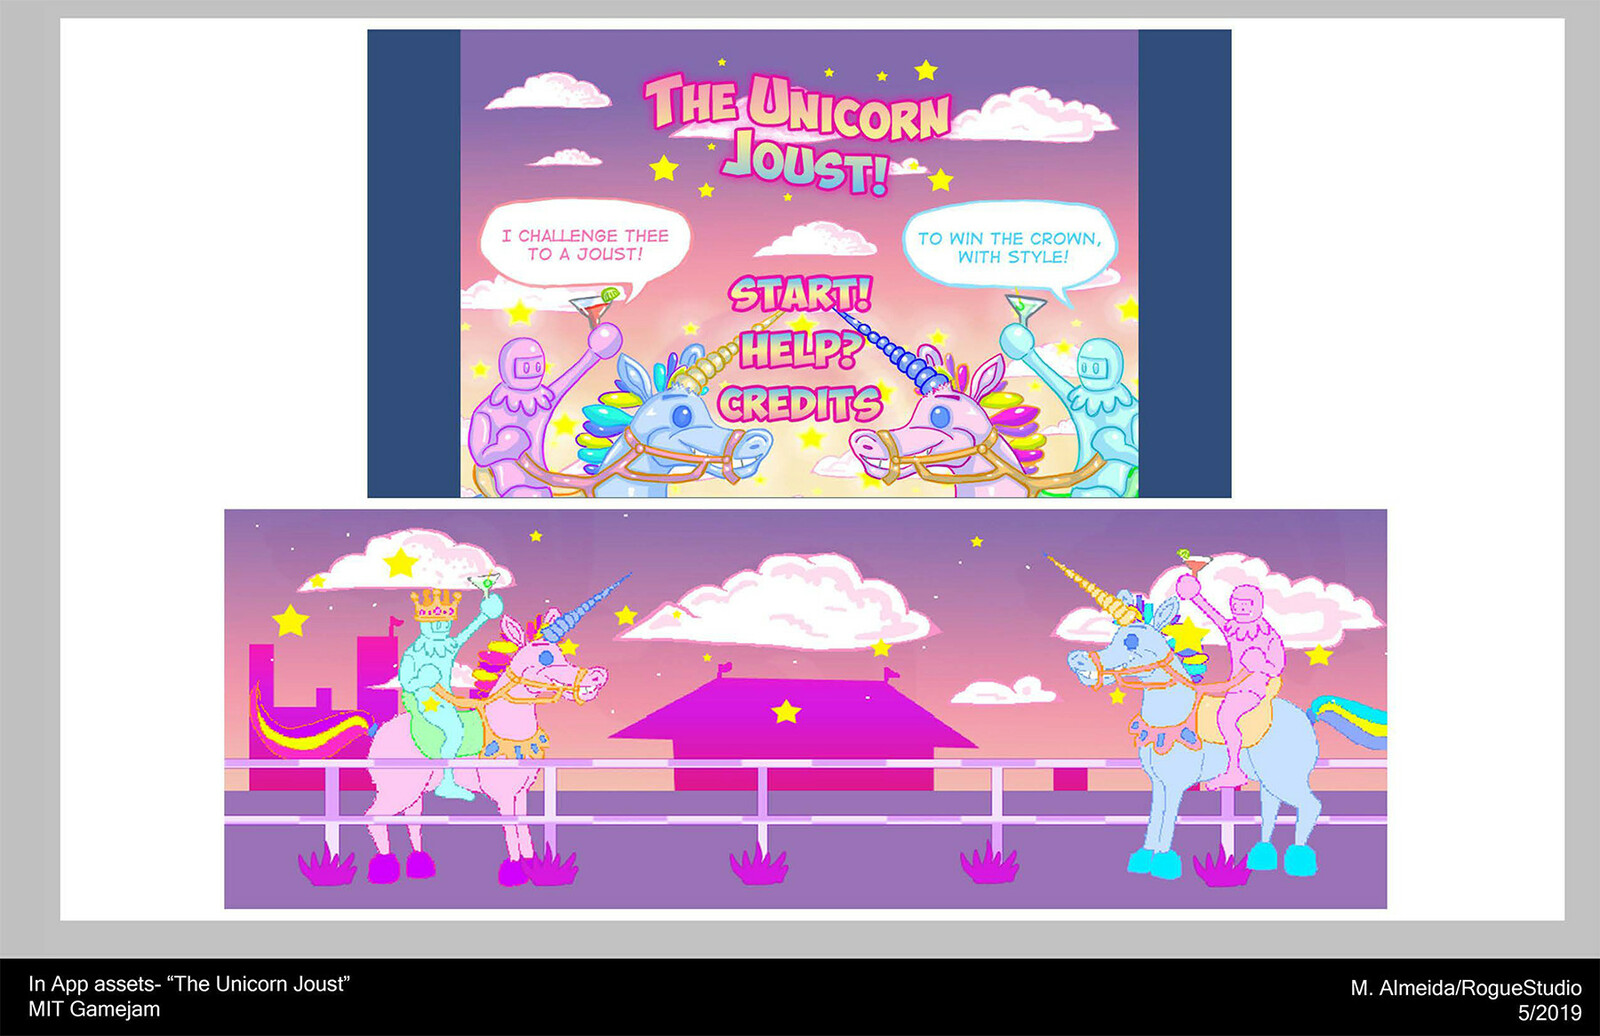 The Unicorn Joust - iOS/Android App - art assets produced for MIT Gamejam